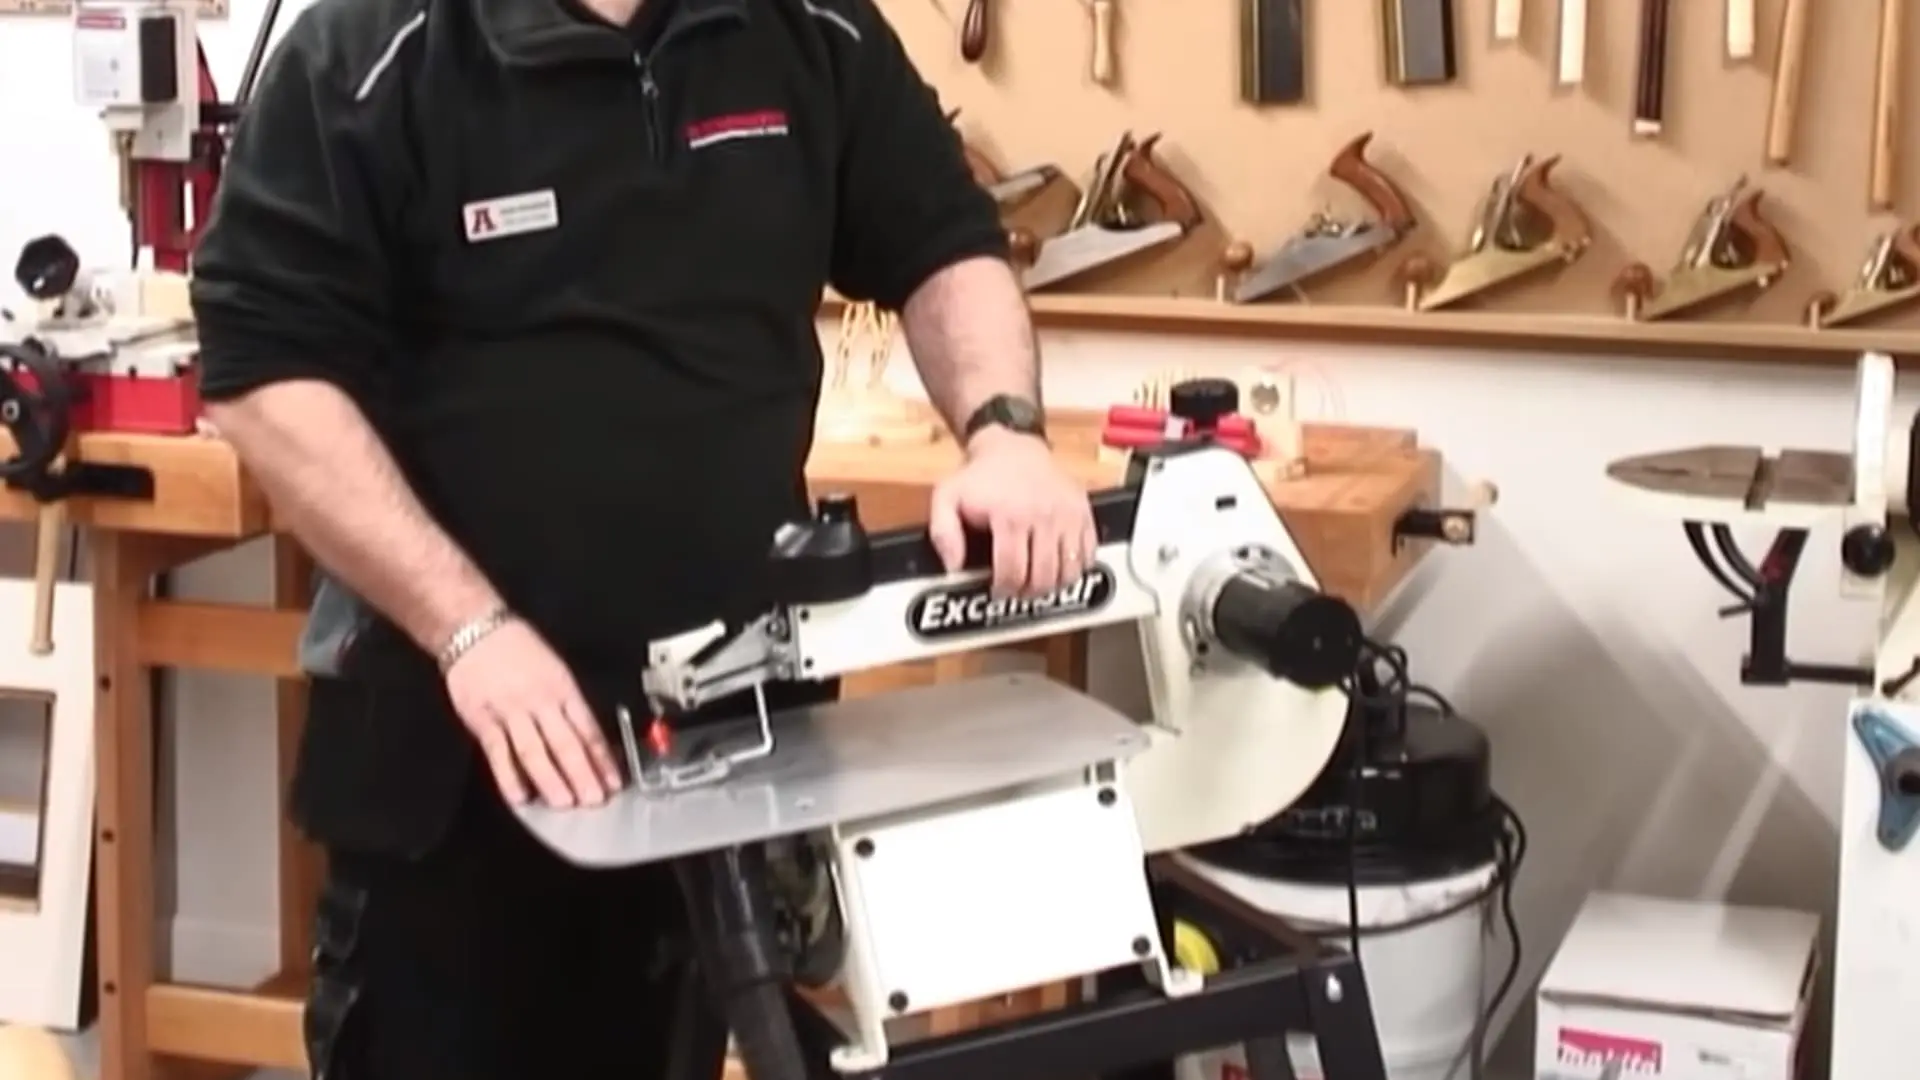 EXCALIBUR 16 1.3A Variable Speed Woodworking Scroll Saw - Best Professional Scroll Saw